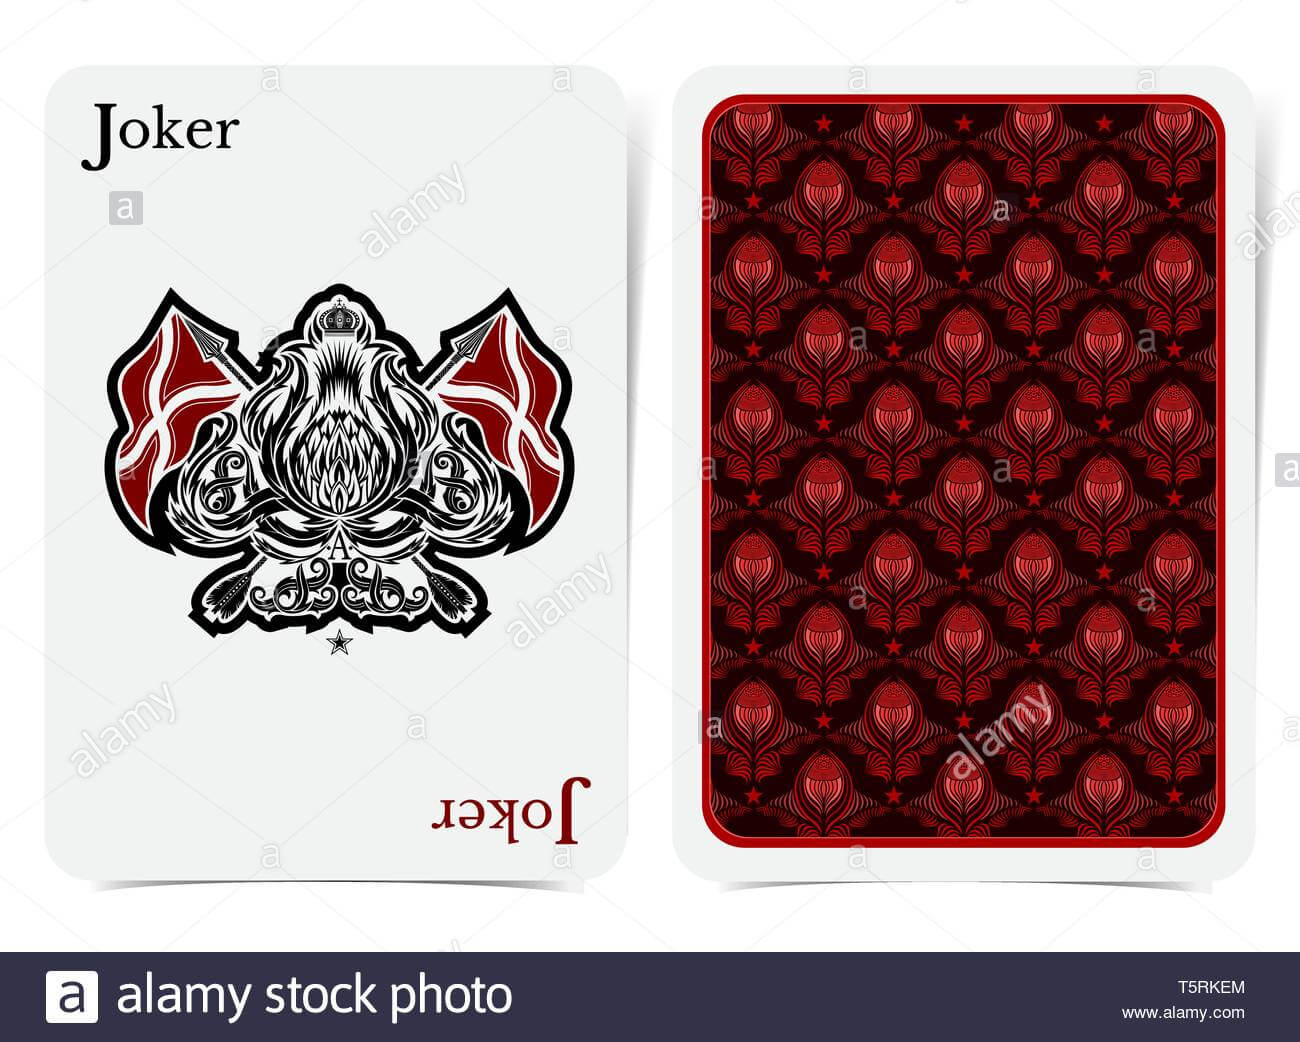 Face Of Joker Card Thistle Plant Pattern With Crossed Flags With Regard To Joker Card Template